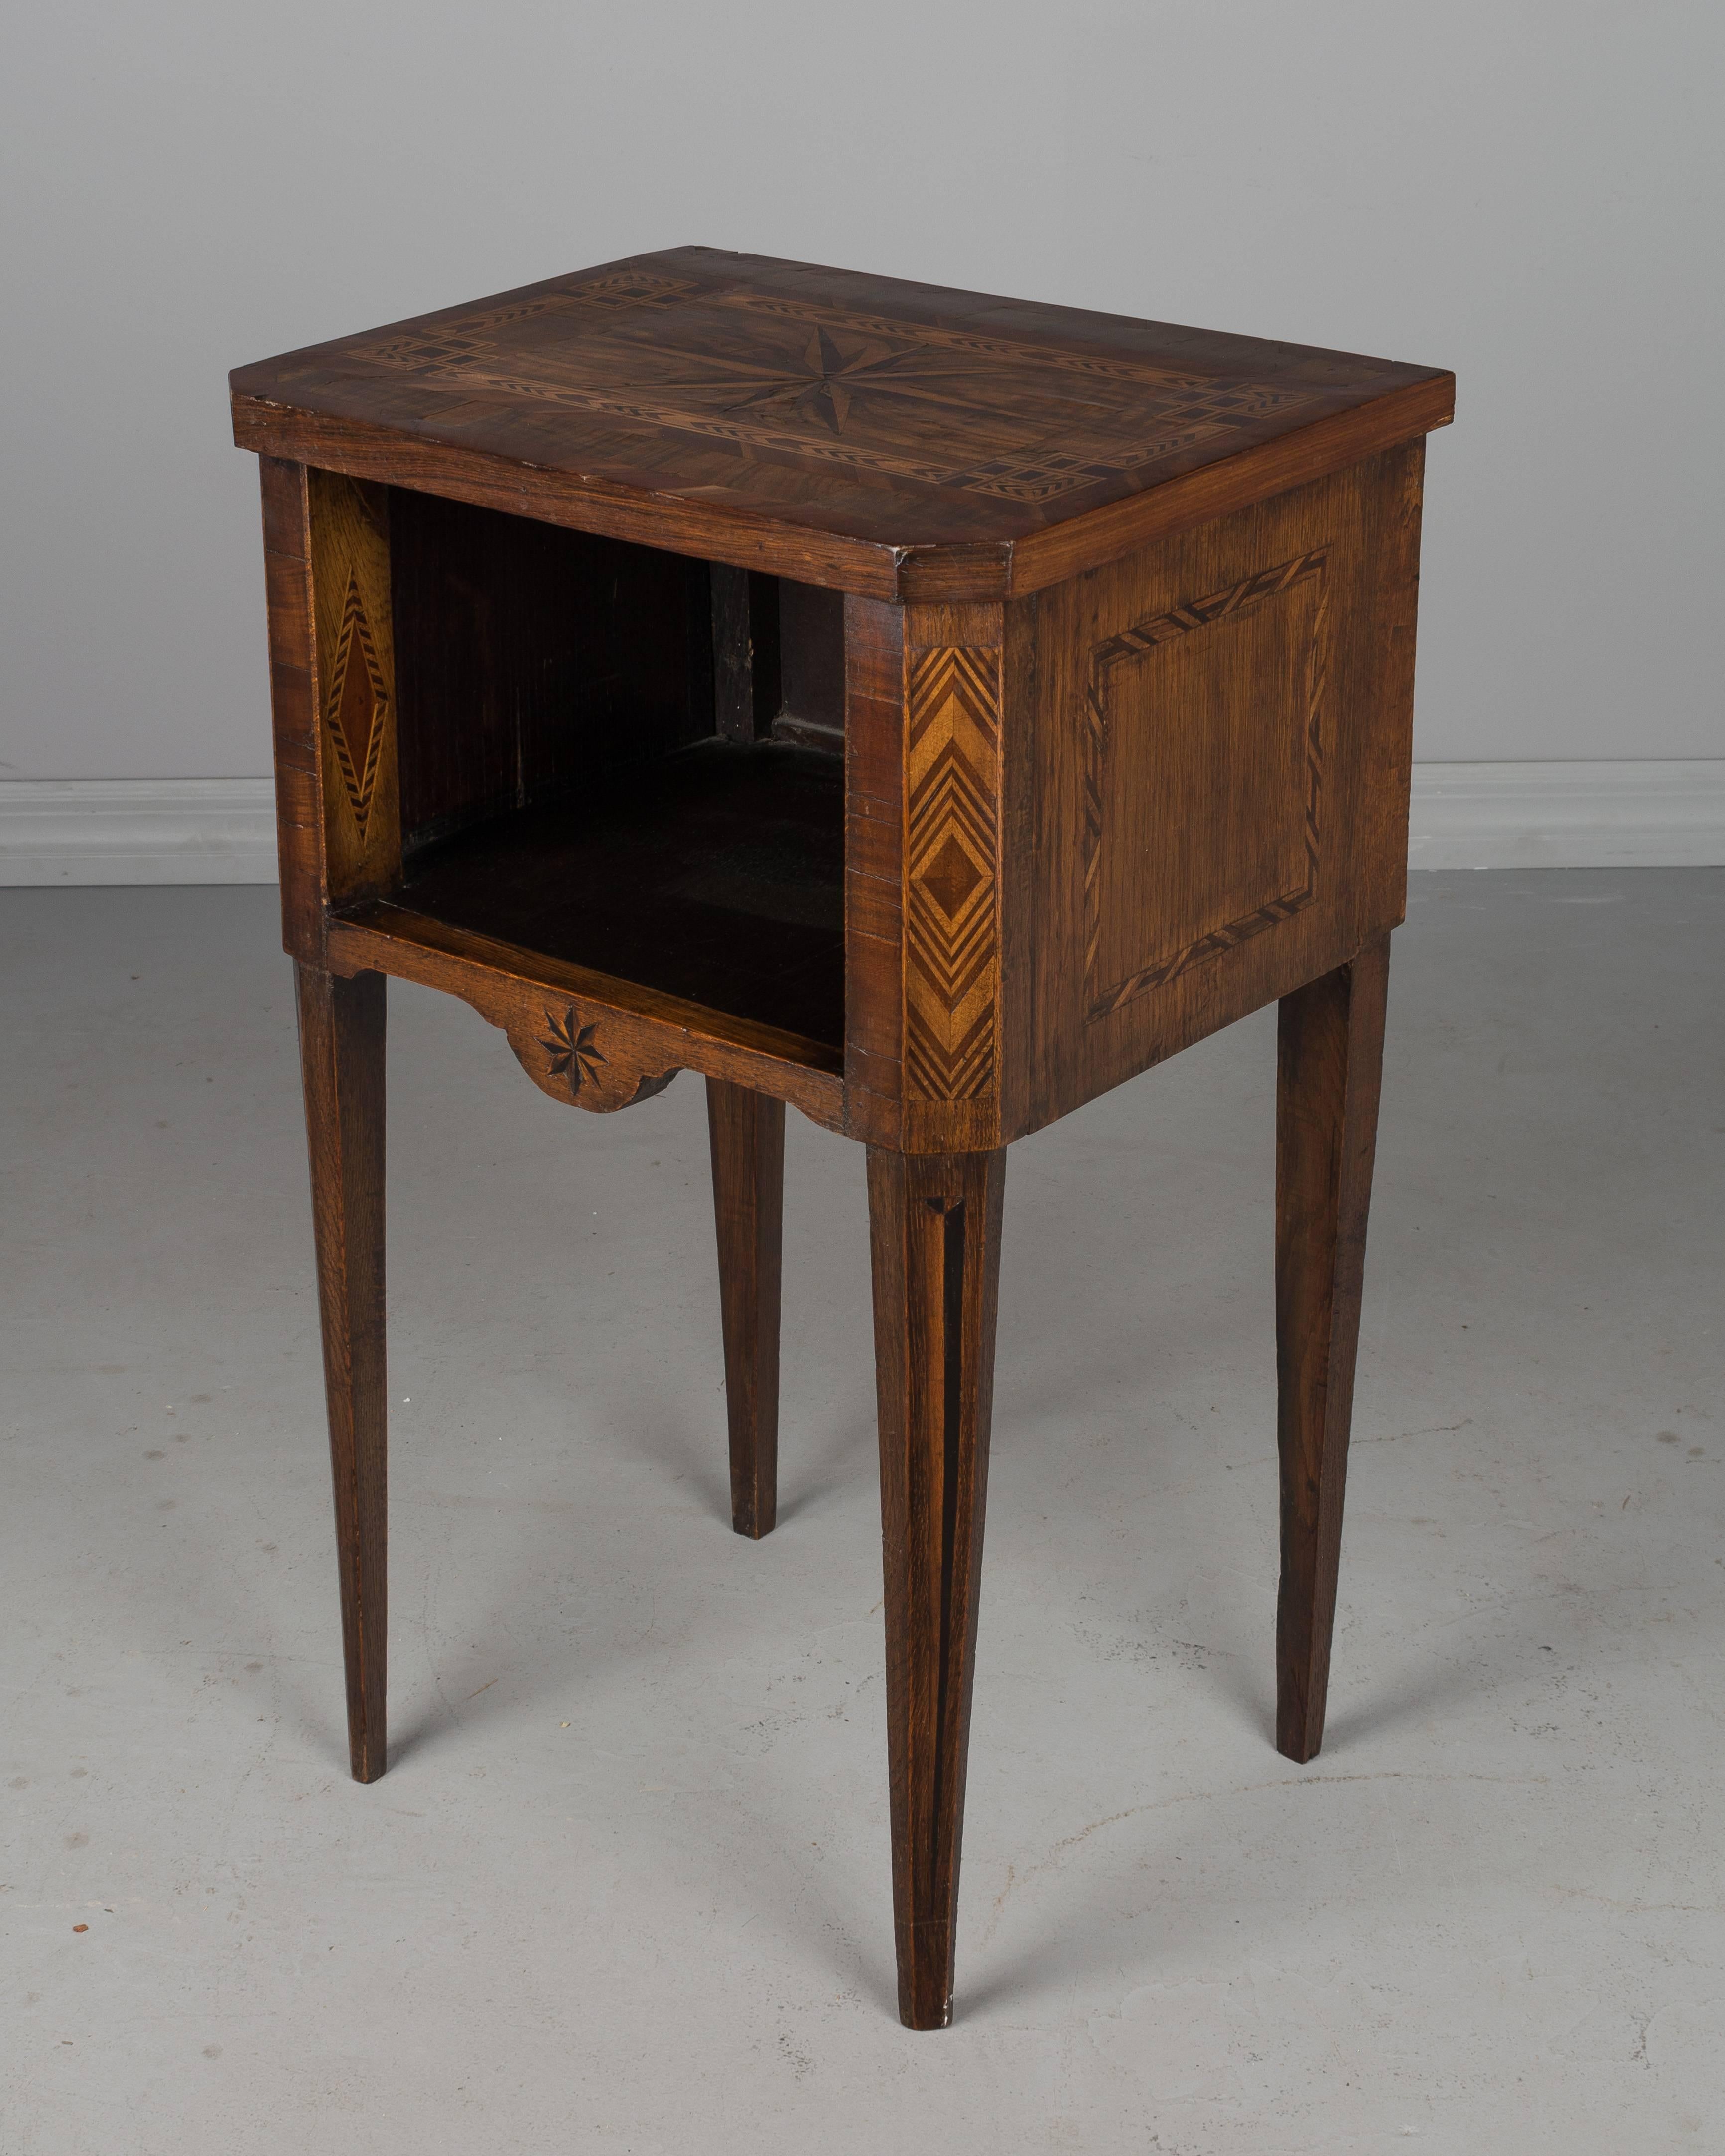 A French Louis XVI style side table made of walnut with fine marquetry inlay and slender legs. In good condition with only minor losses. Please refer to photos for more details. We have a large selection of French antiques at Olivier Fleury, Inc. 